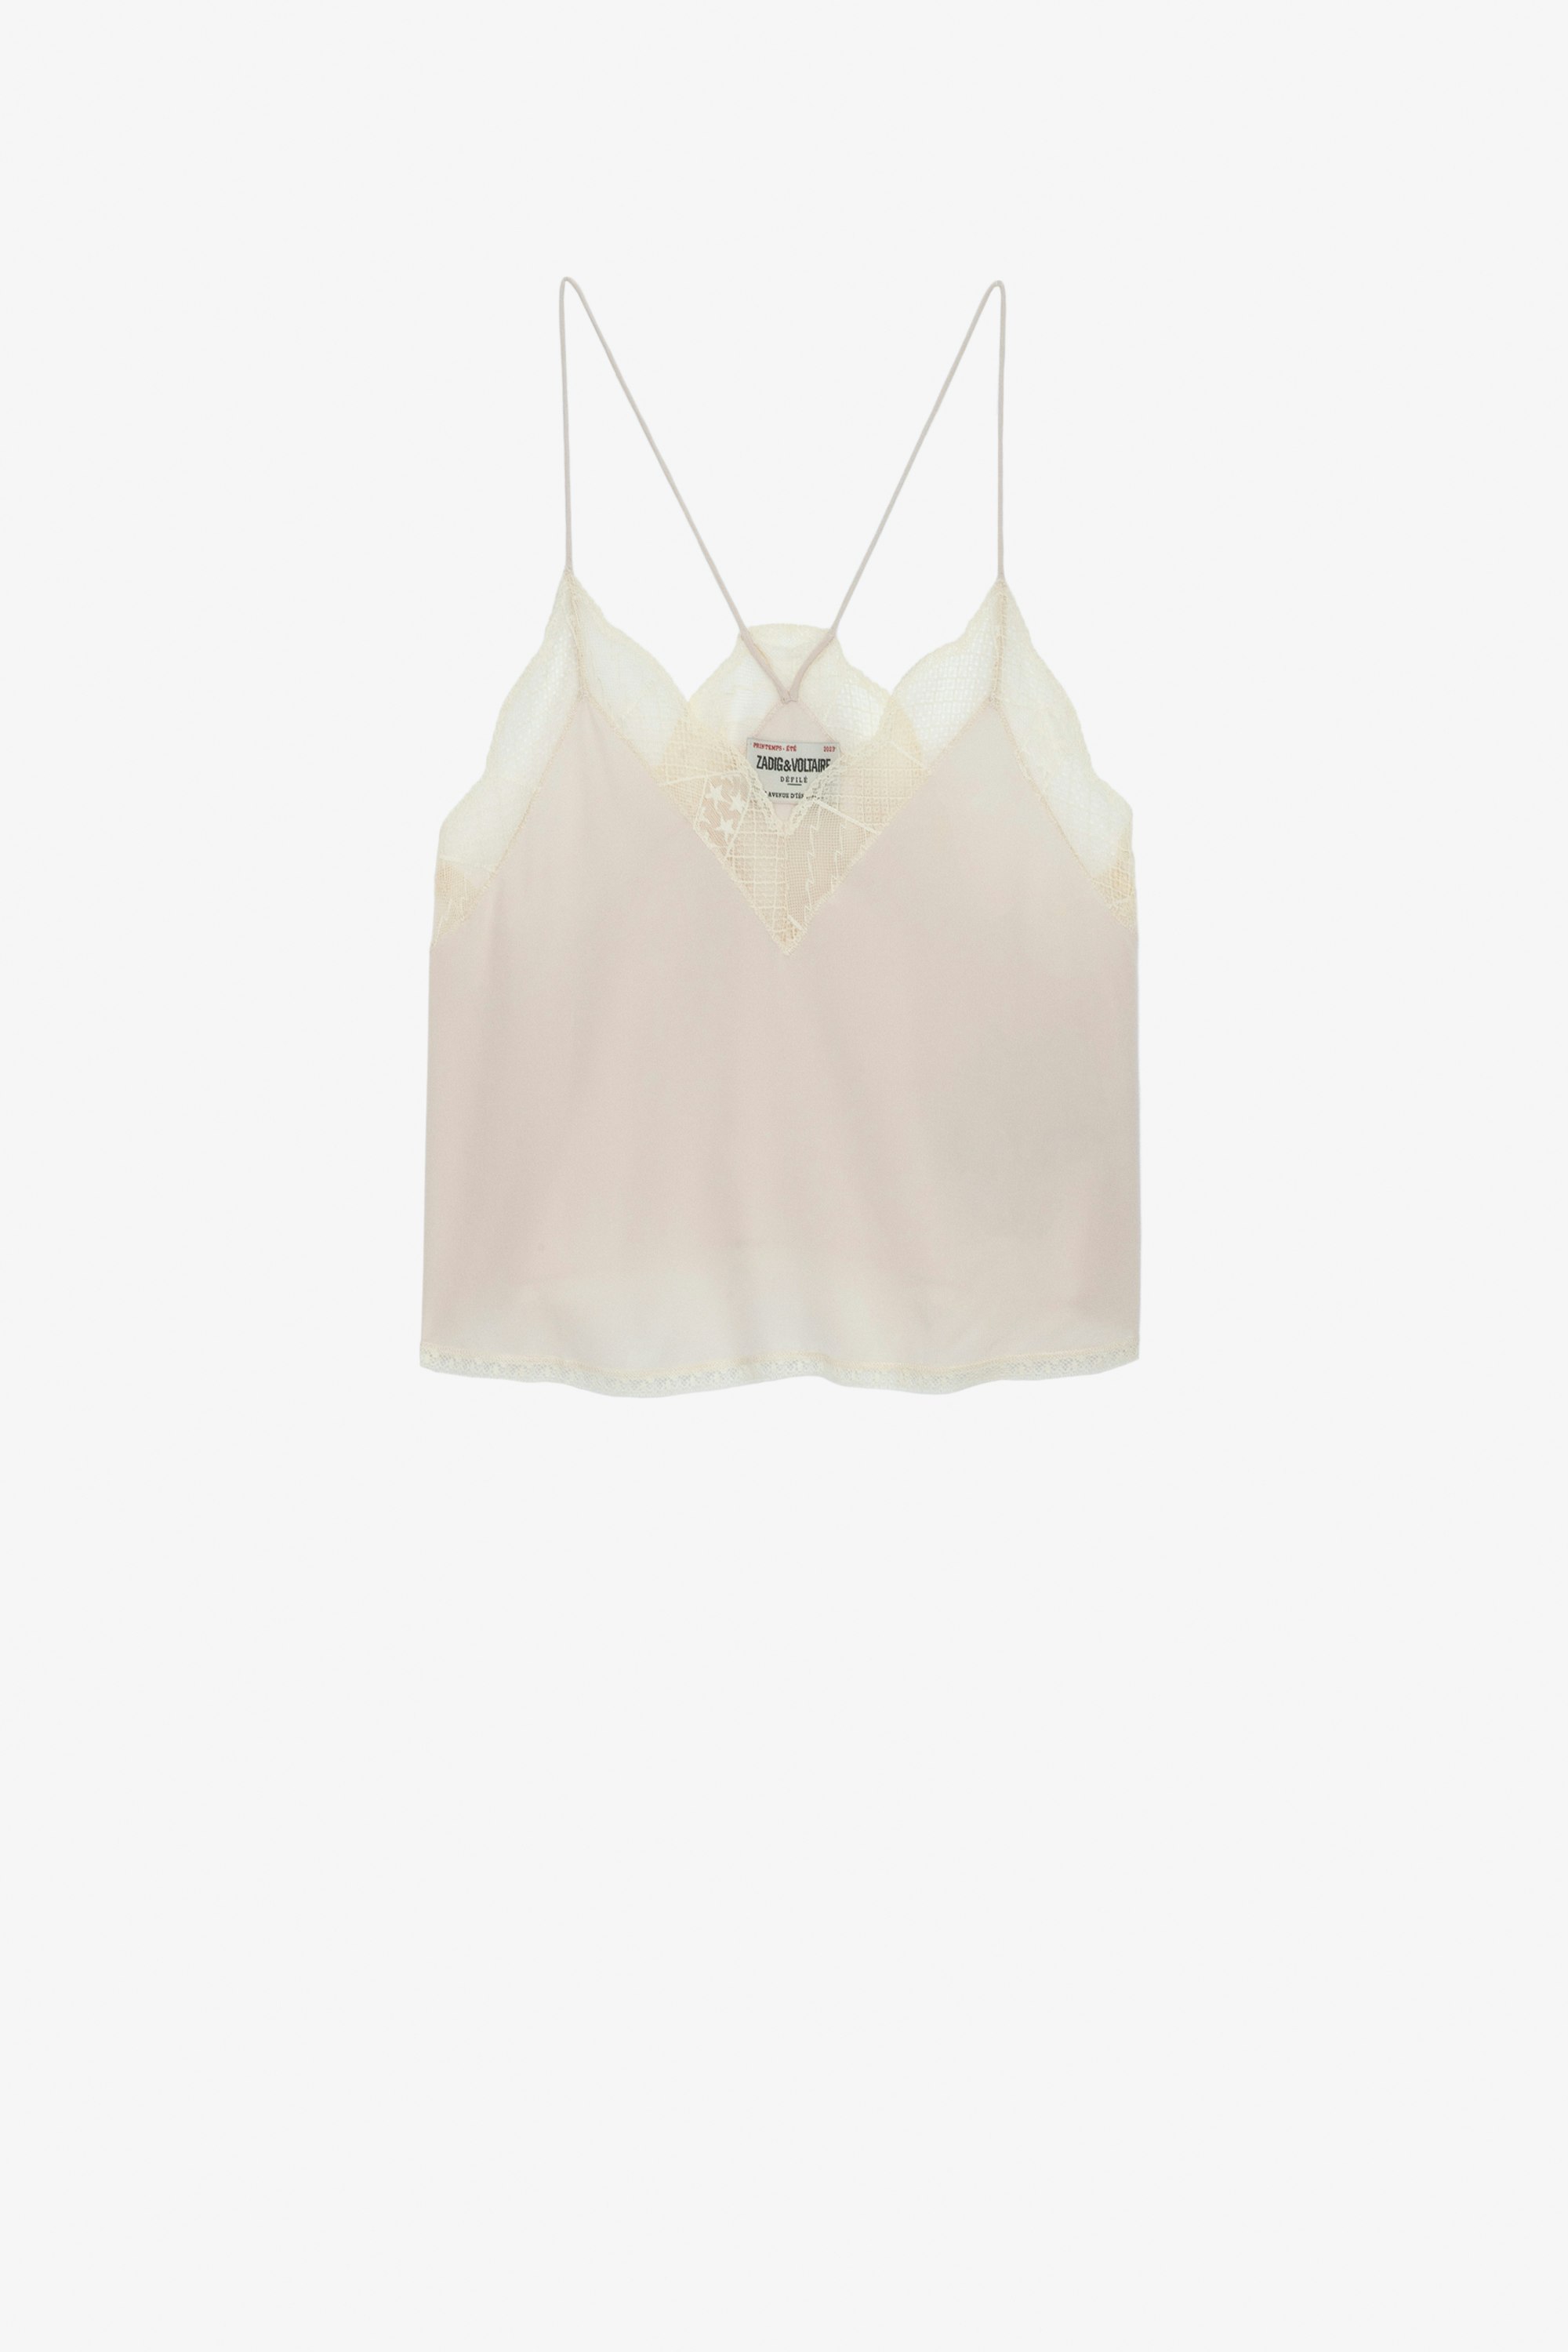 Christy Silk Cropped Camisole Women's off-white silk crop top camisole with lace neckline